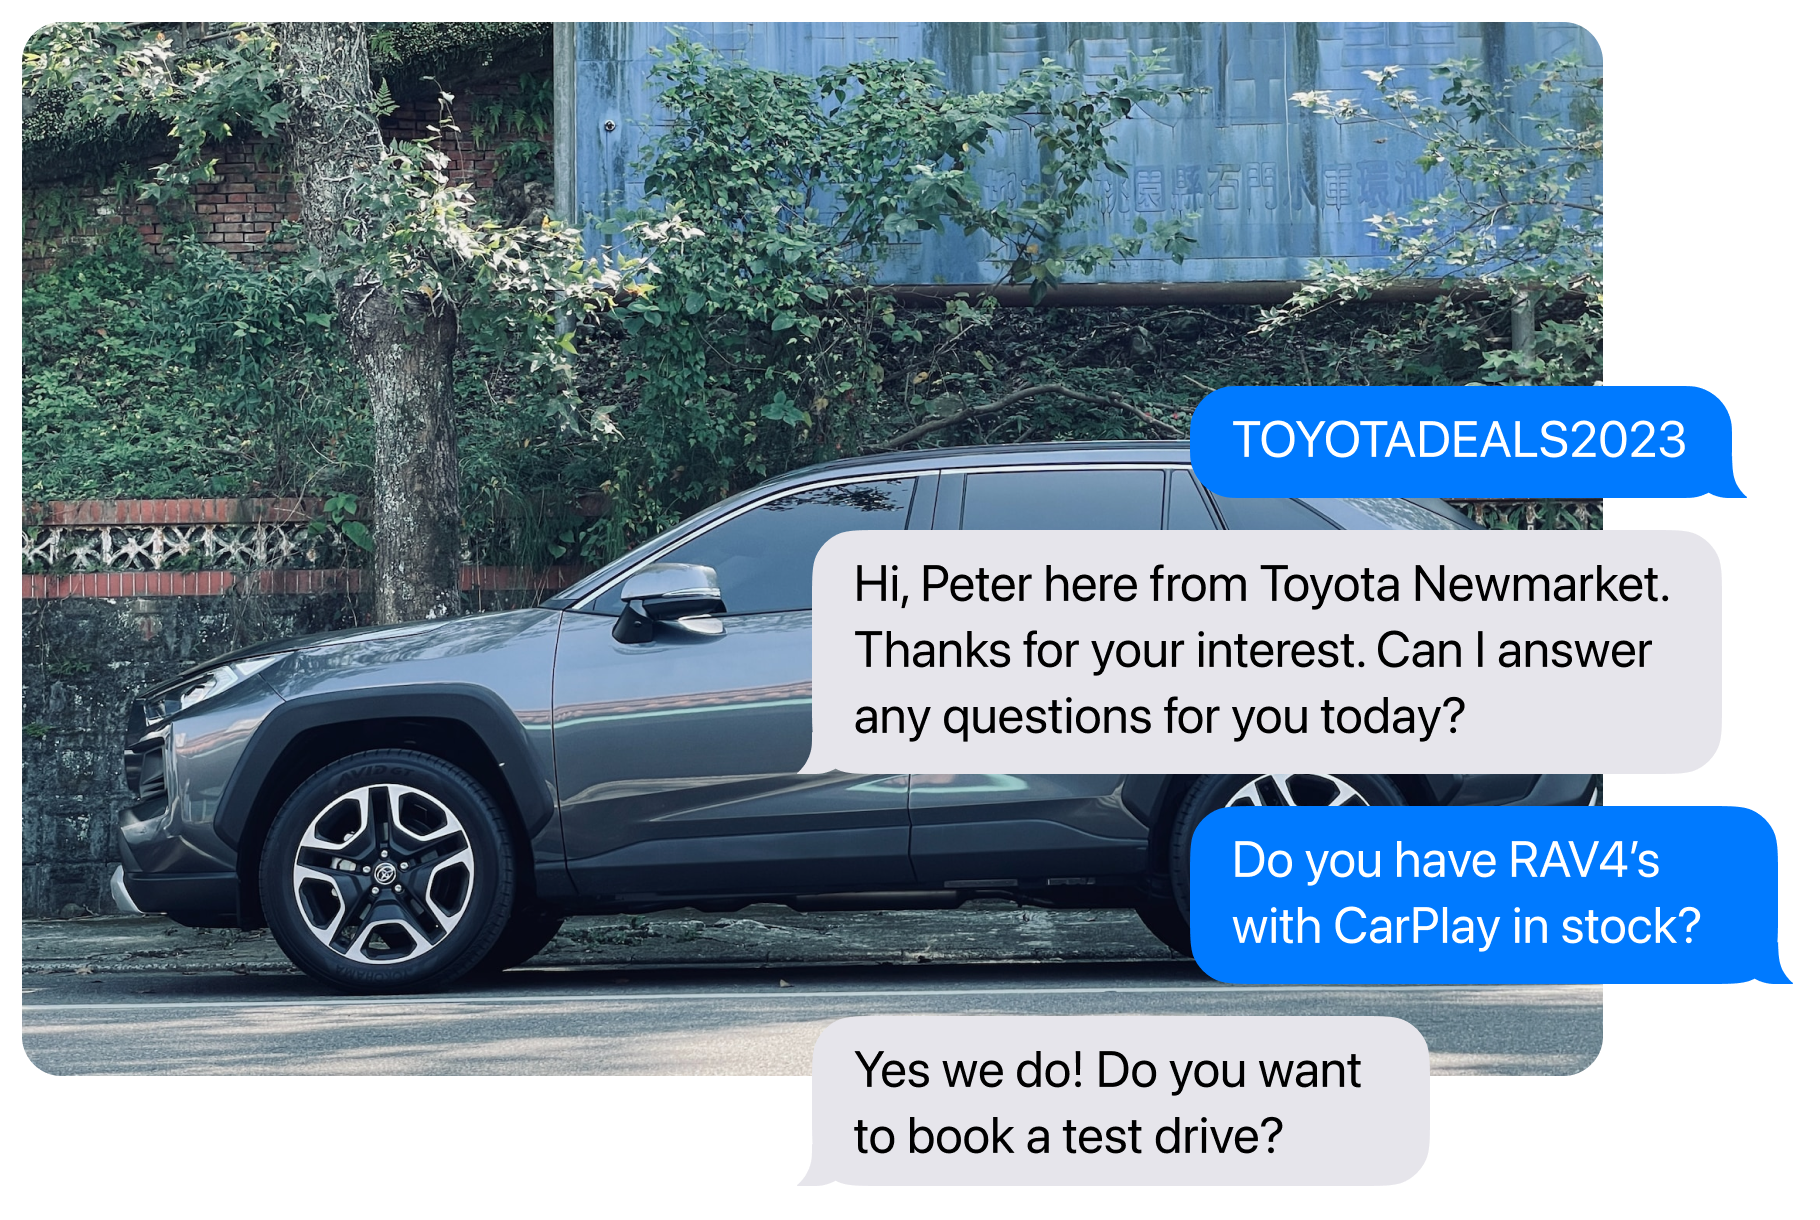 Using Text-for-info keywords for car sales exchange